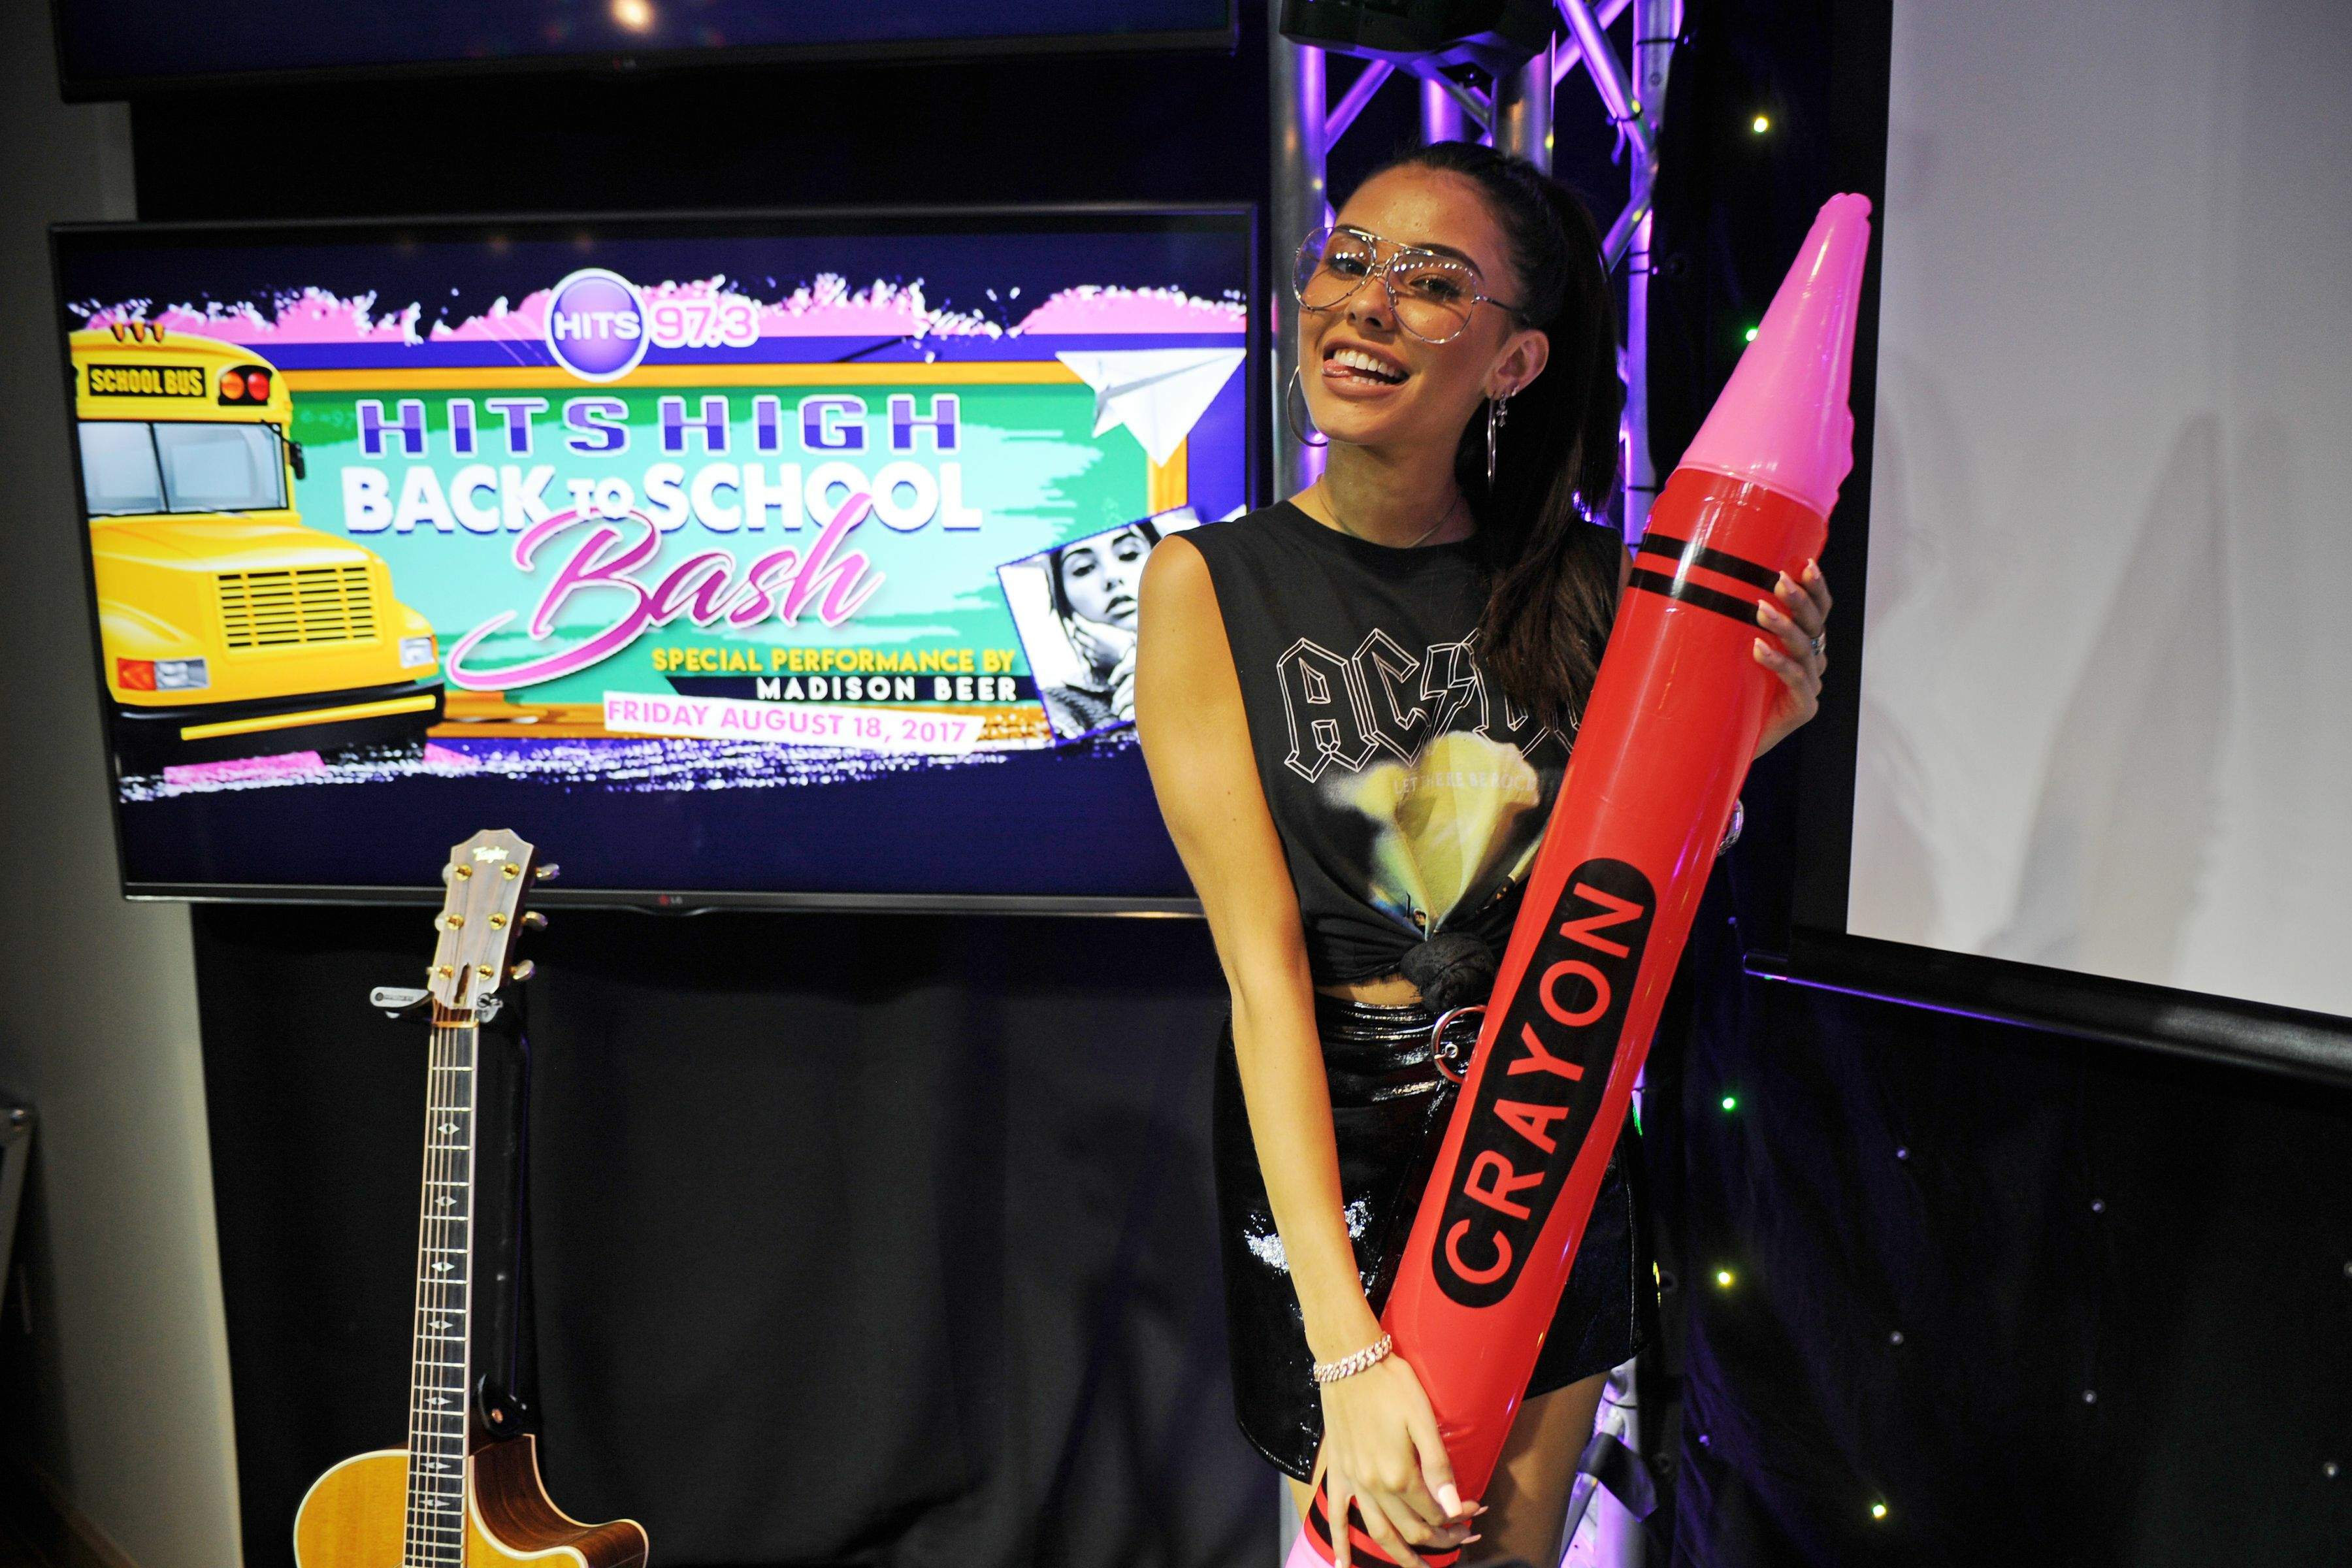 Madison Beer performing at the Y100 mack-a-pooloza party